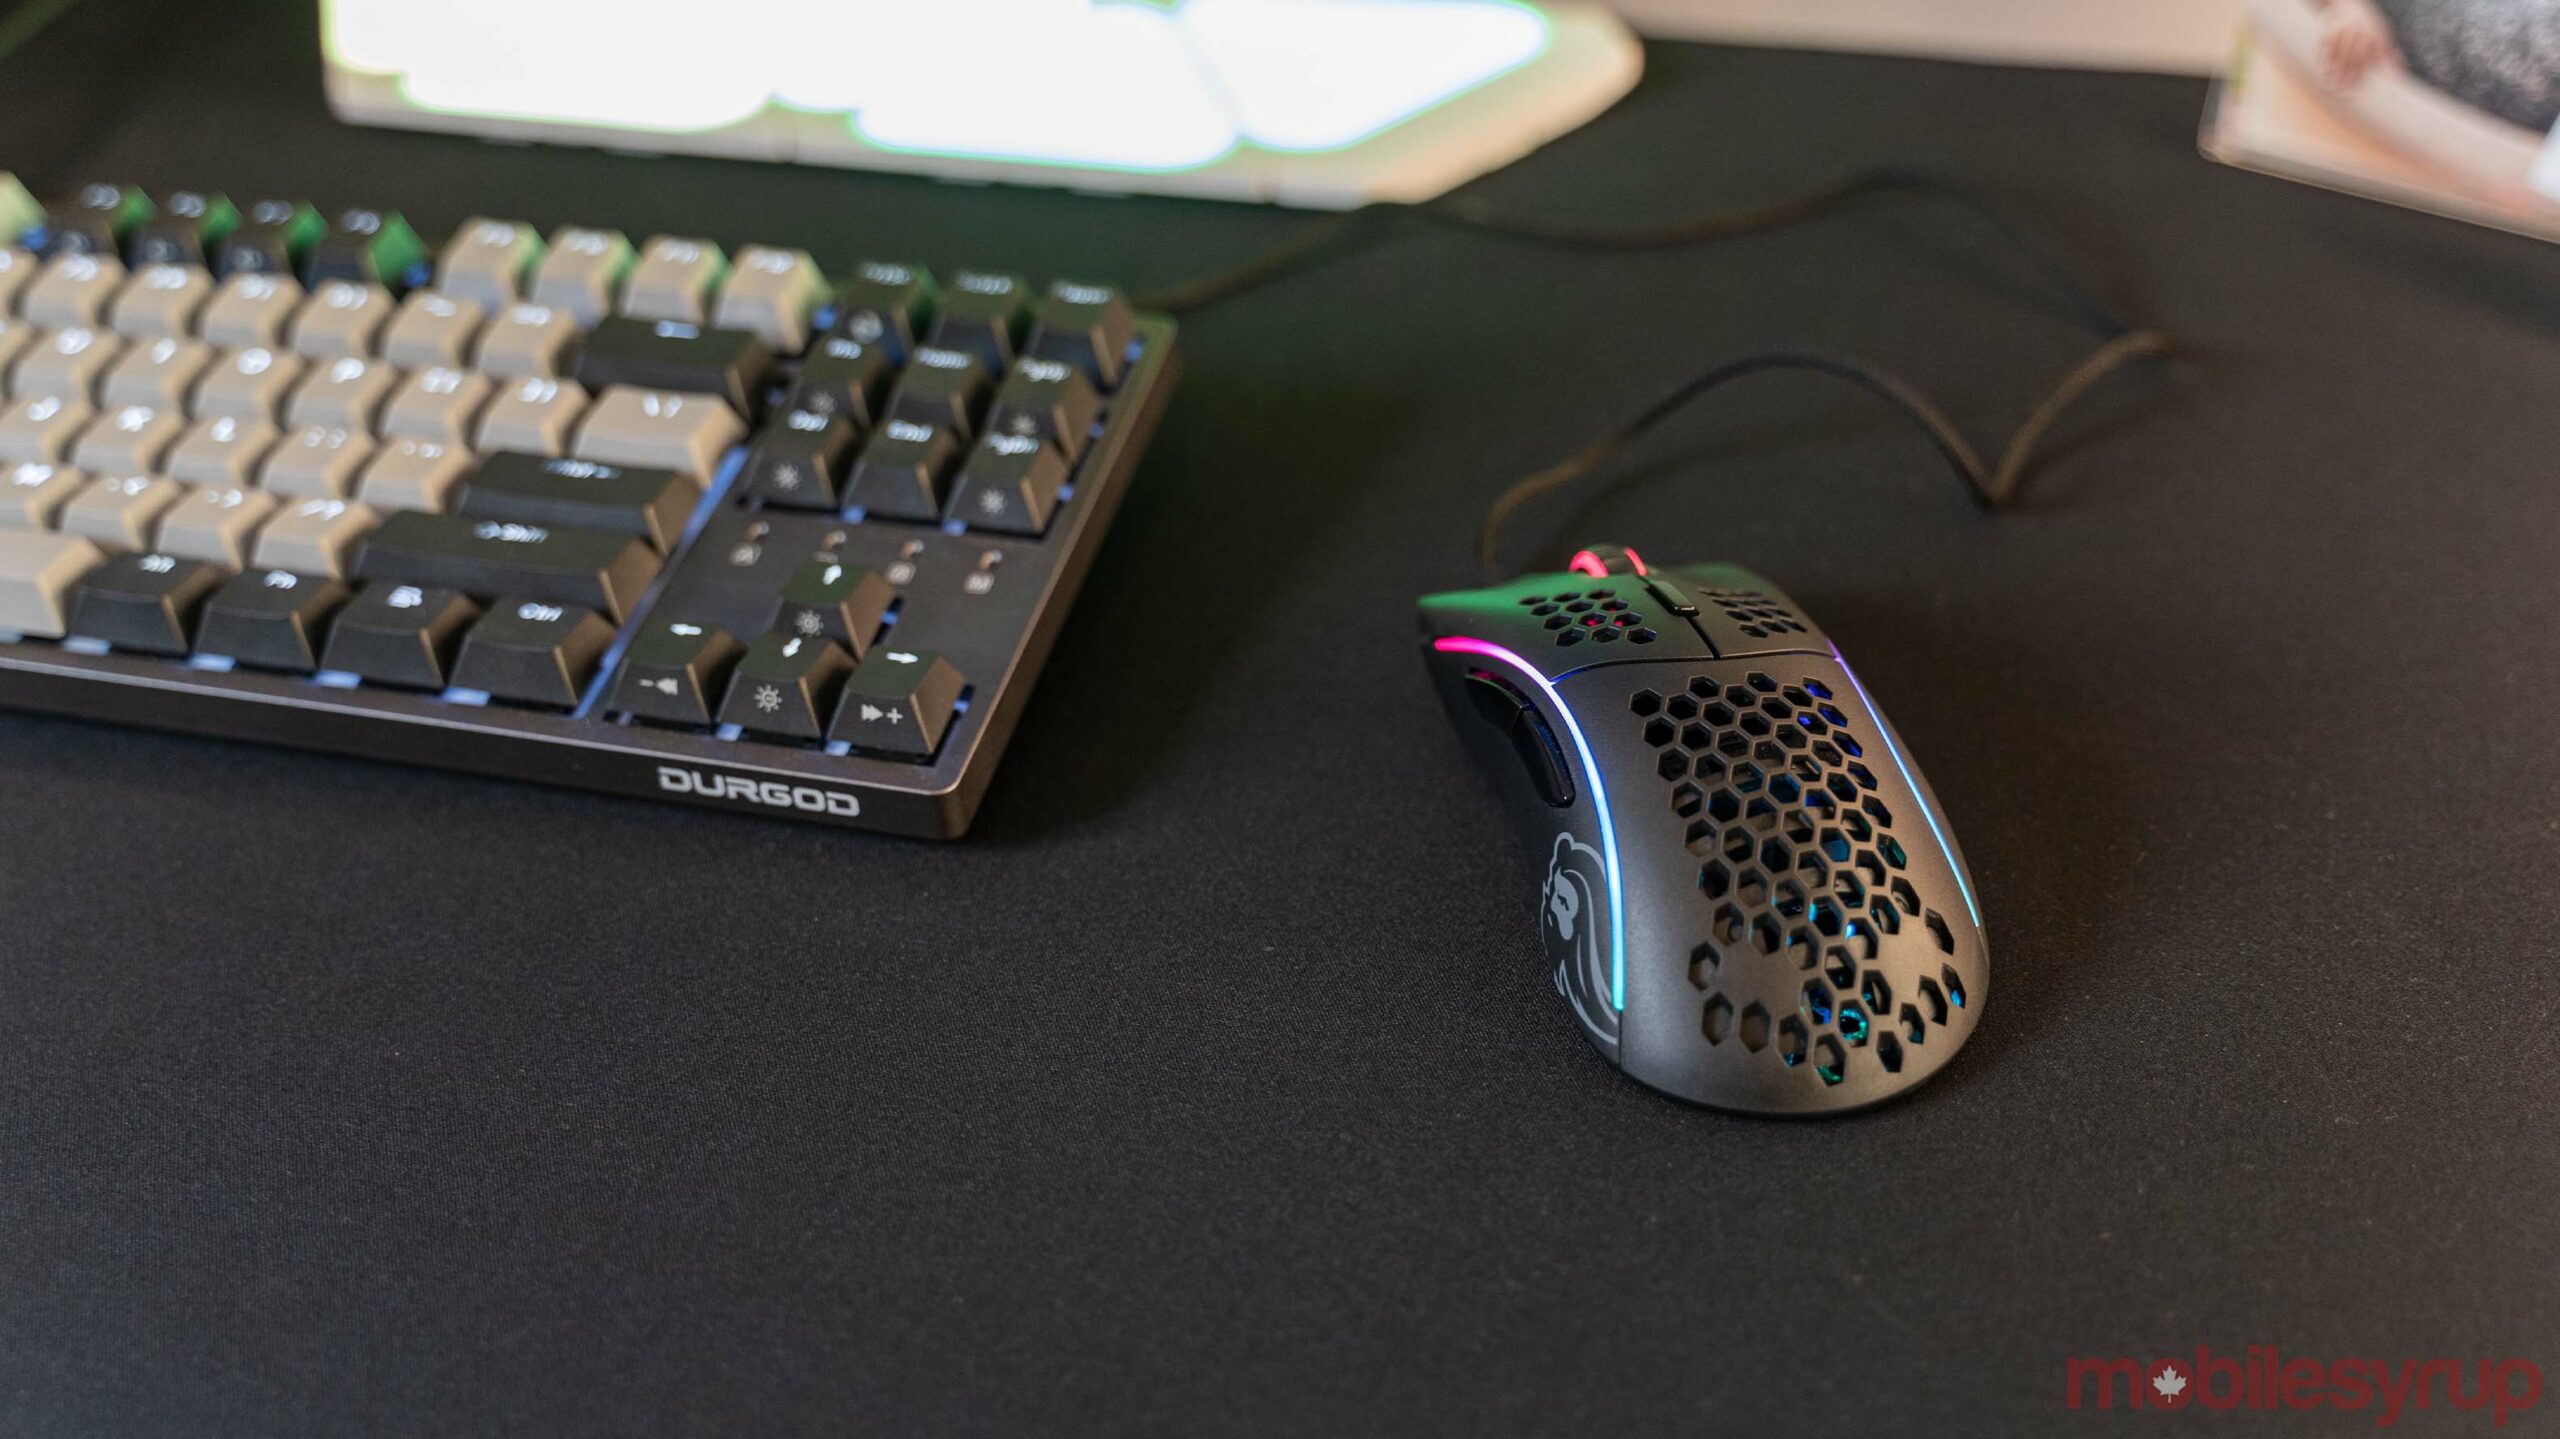 The Glorious Model D is a great mouse for the gamer on your